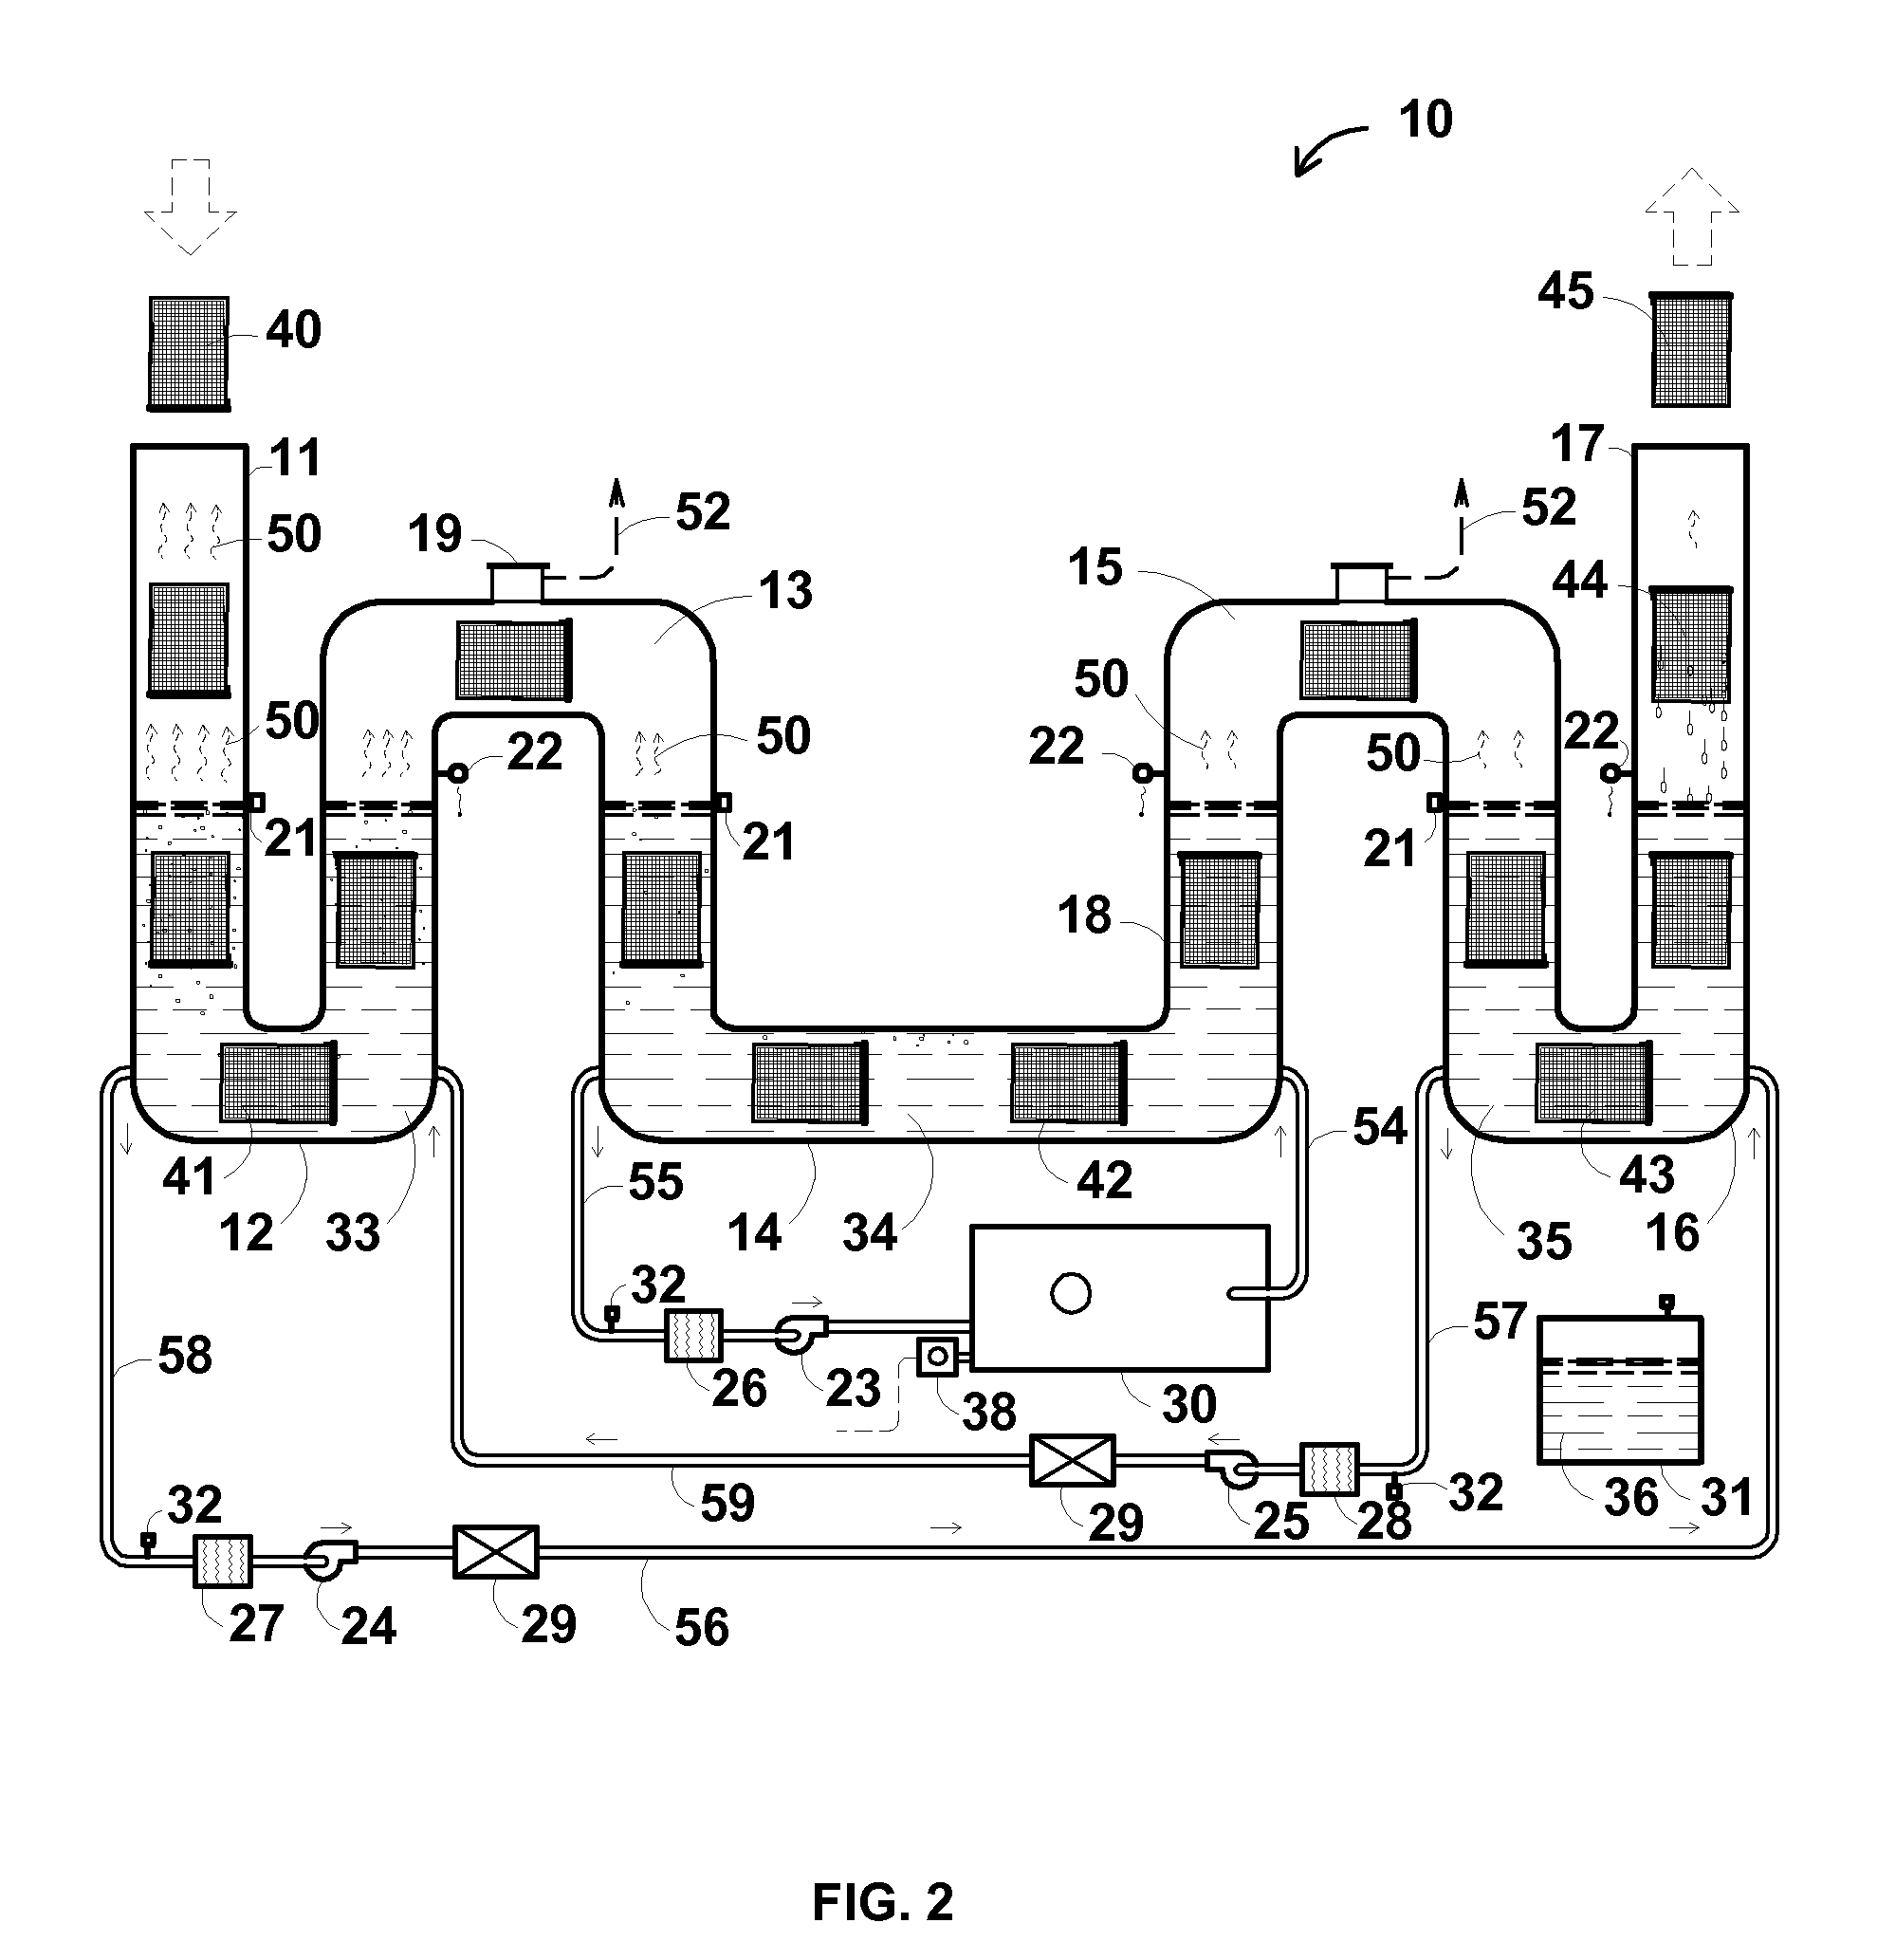 Method and apparatus for biomass torrefaction, manufacturing a storable fuel from biomass and producing offsets for the combustion products of fossil fuels and a combustible article of manufacture